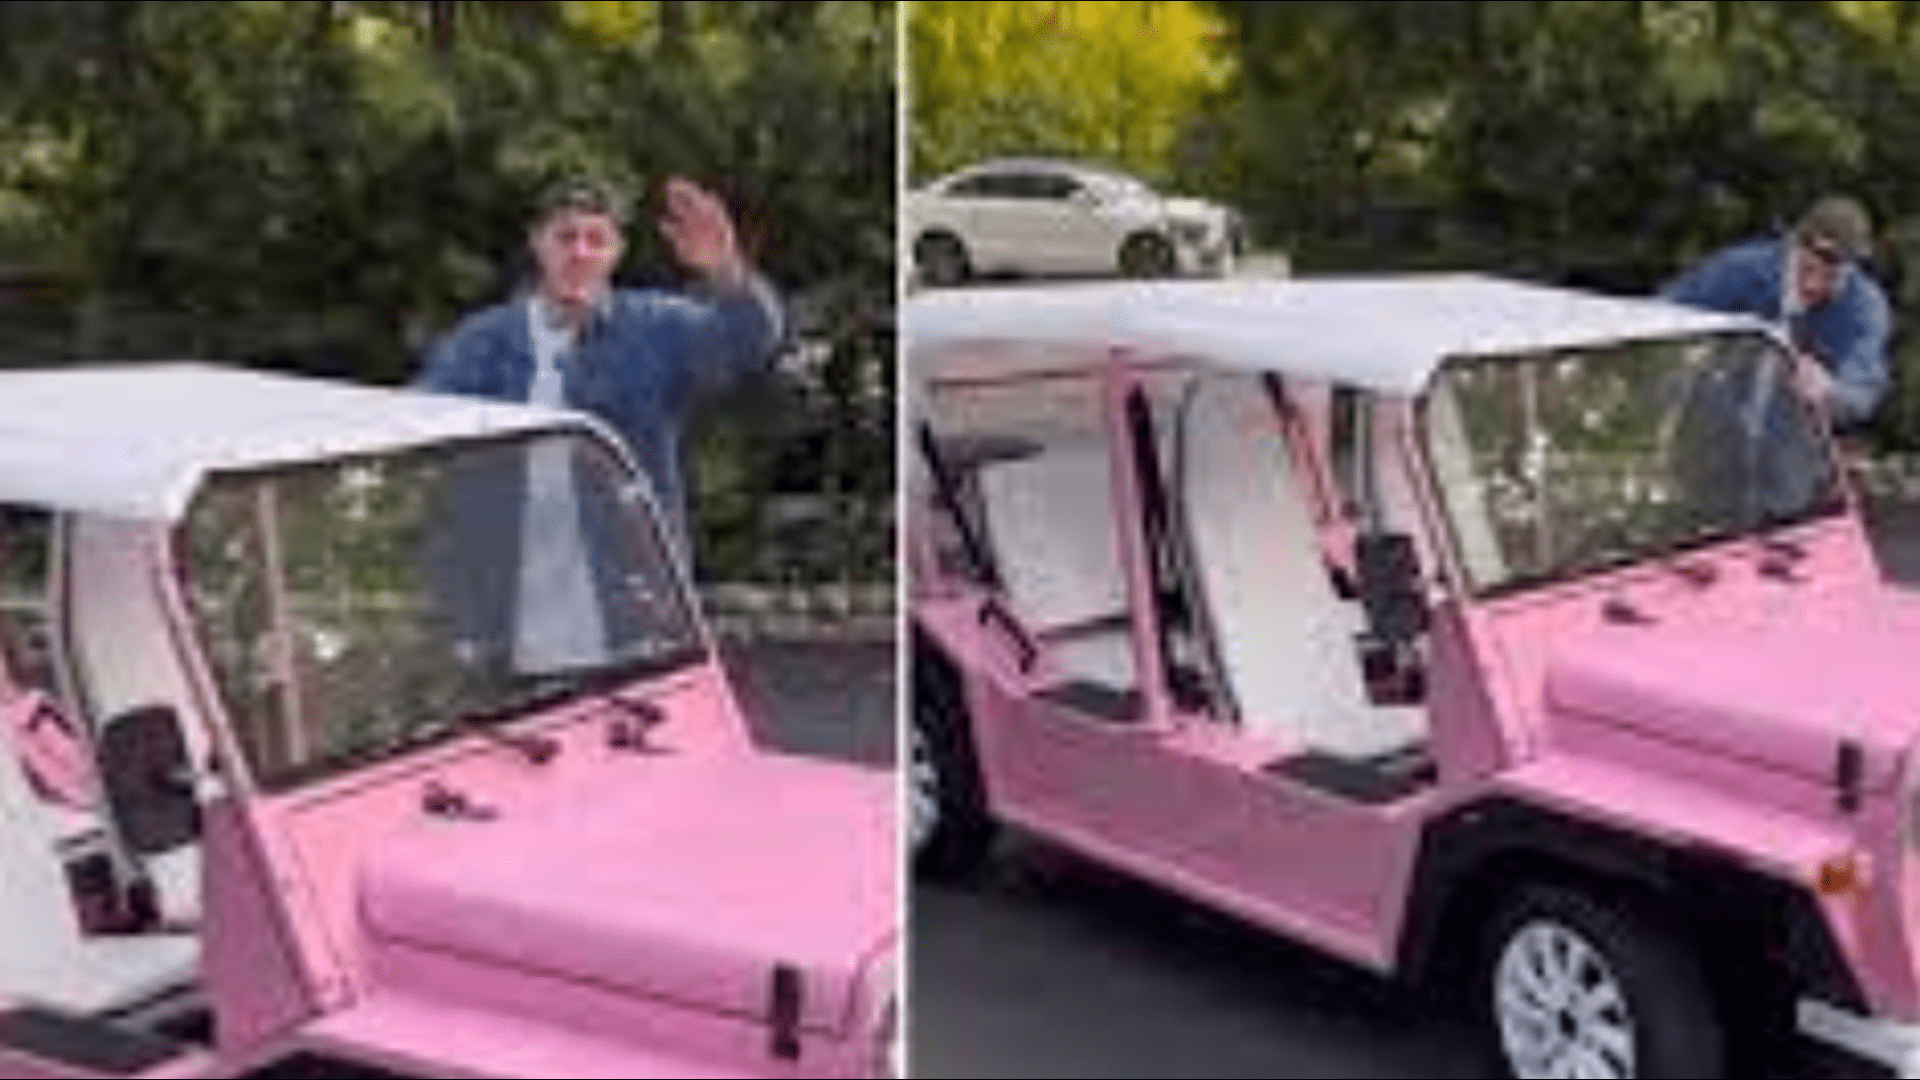 during-the-joy-ride-in-pink-moke-car-pete-davidson-and-northwest-8-appear-together-in-the-first-photos